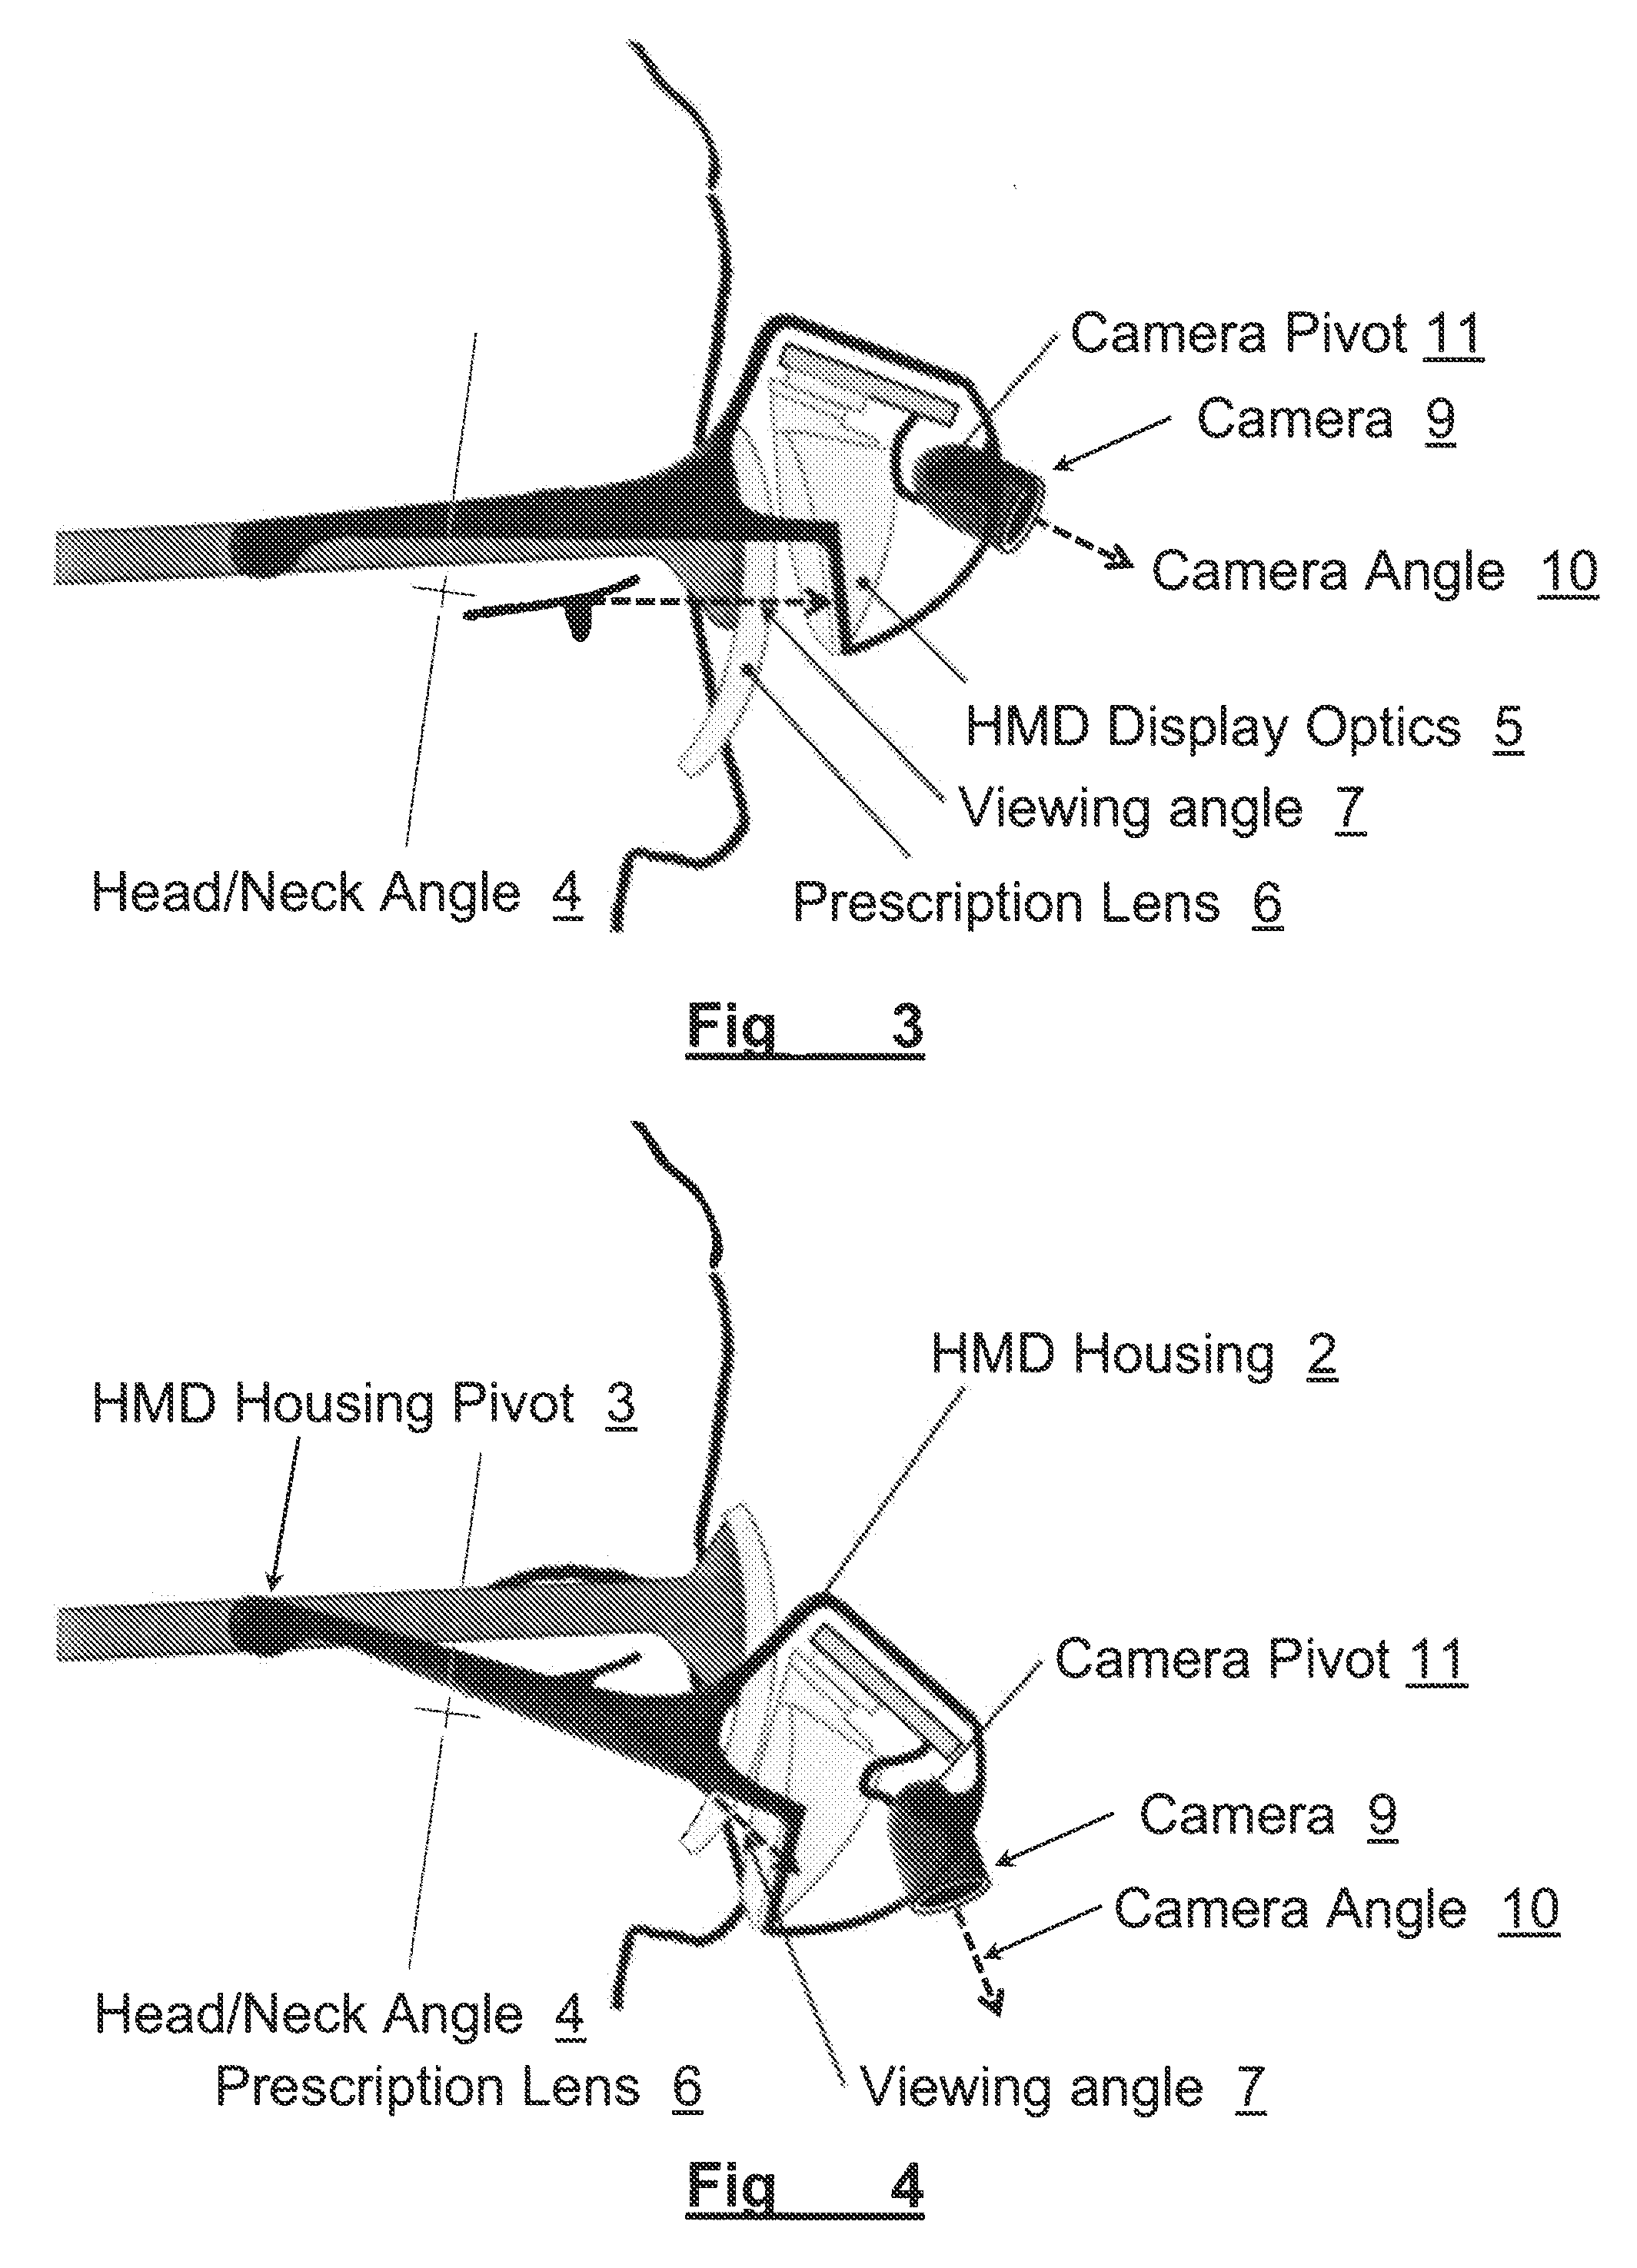 Apparatus and Method for a Bioptic Real Time Video System